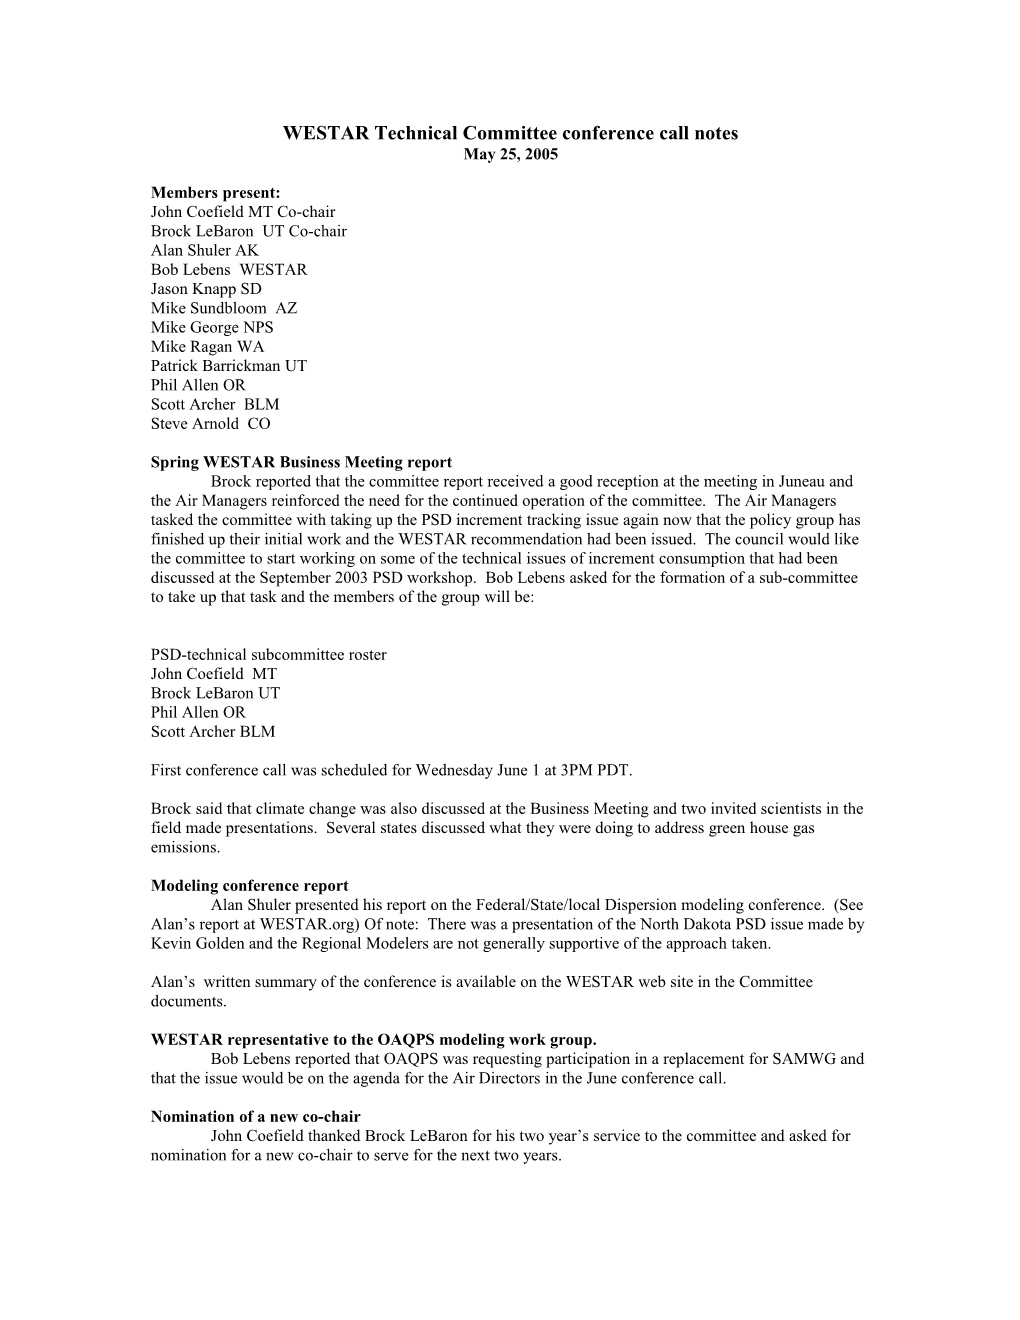 May 25, 2005 WESTAR Technical Committee Conference Call Notes